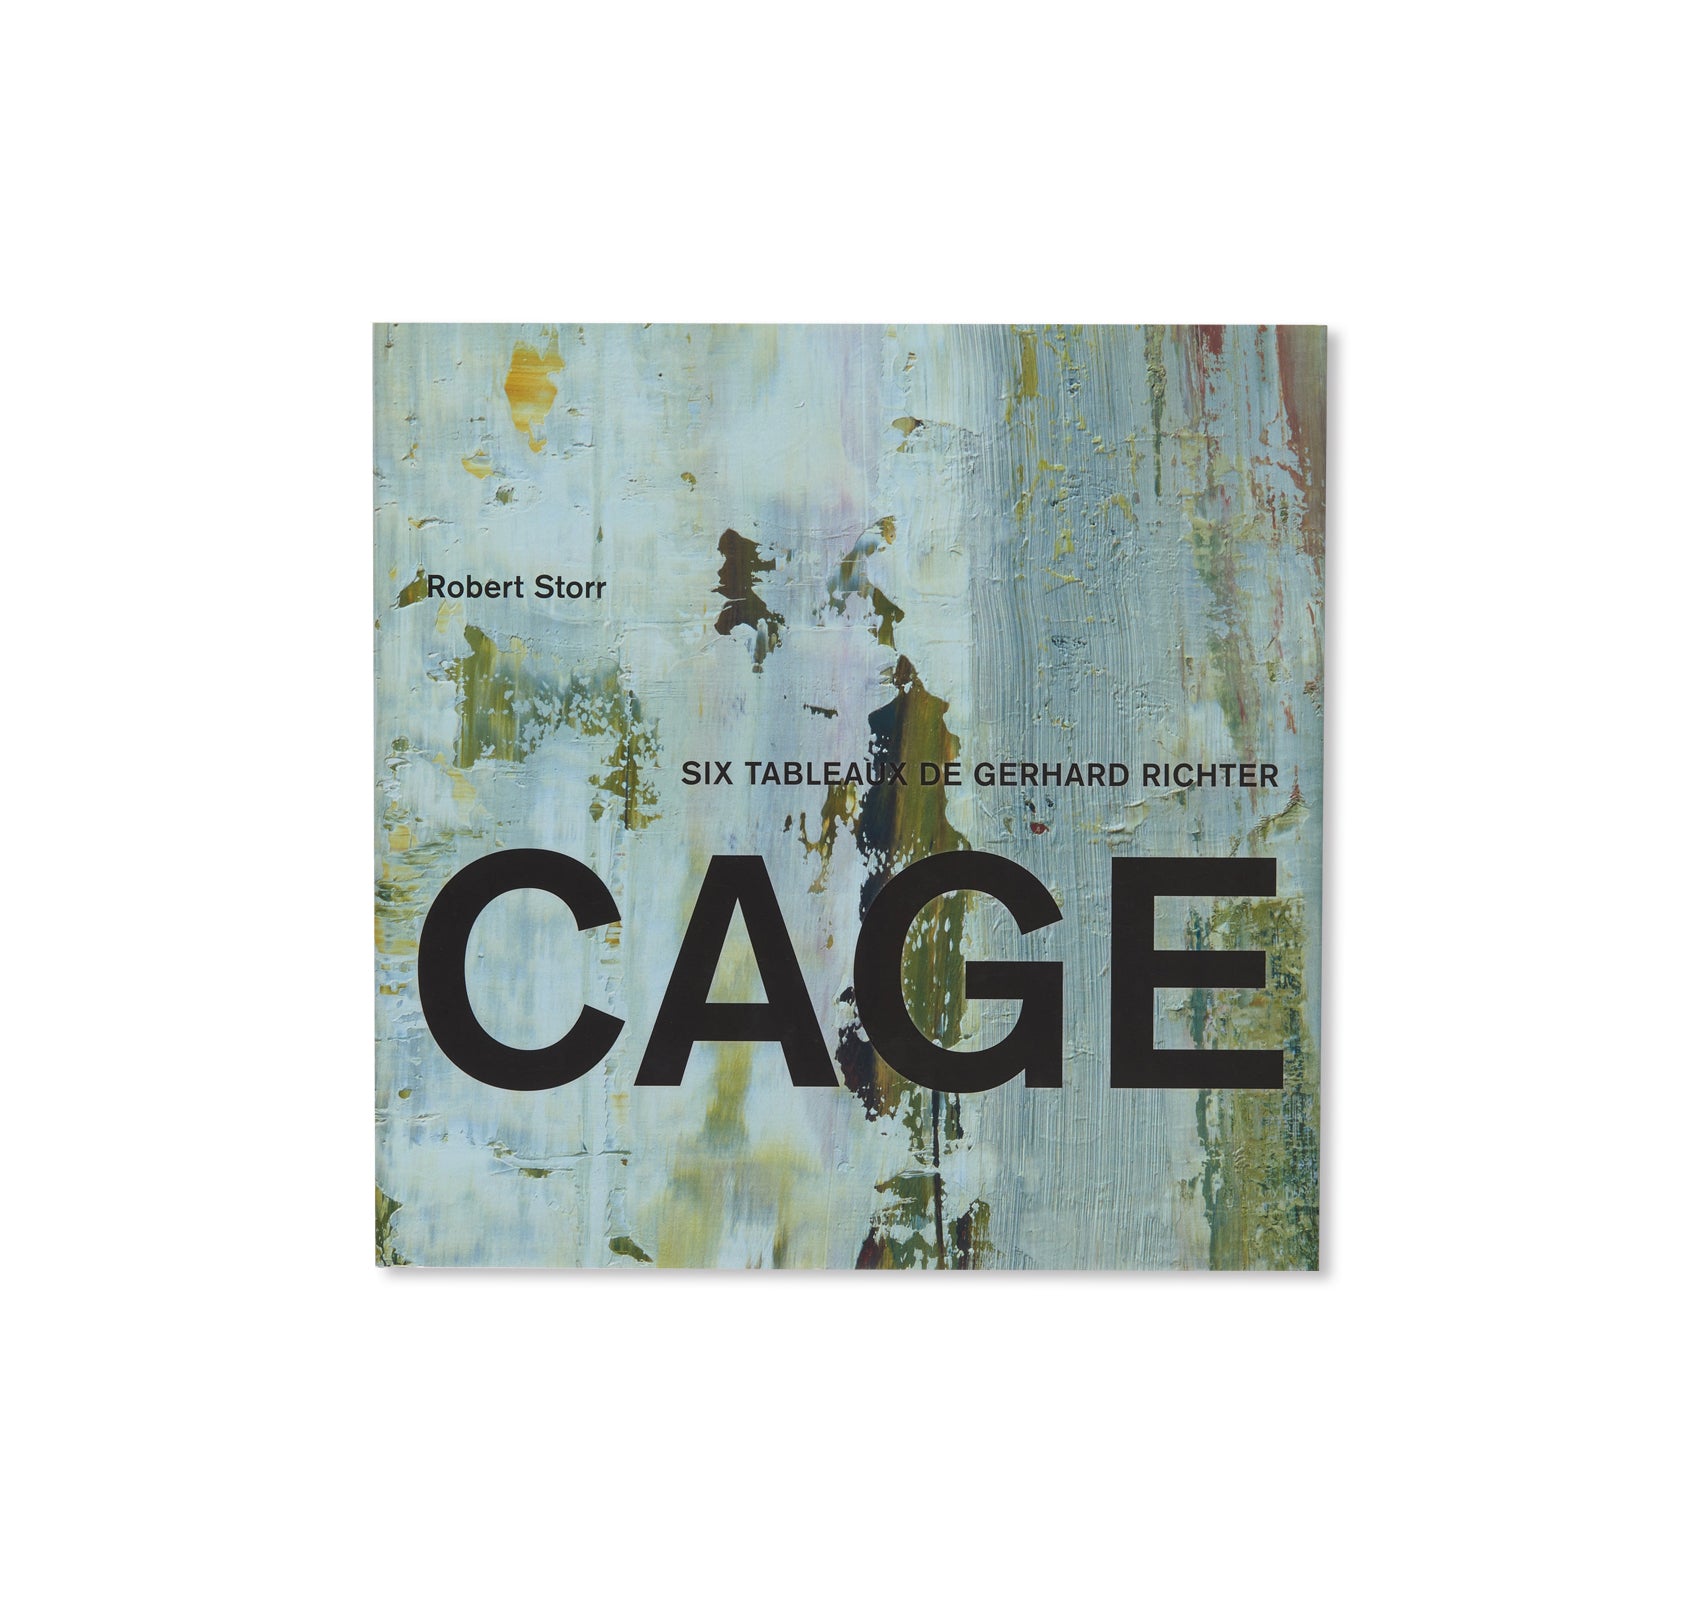 CAGE by Gerhard Richter